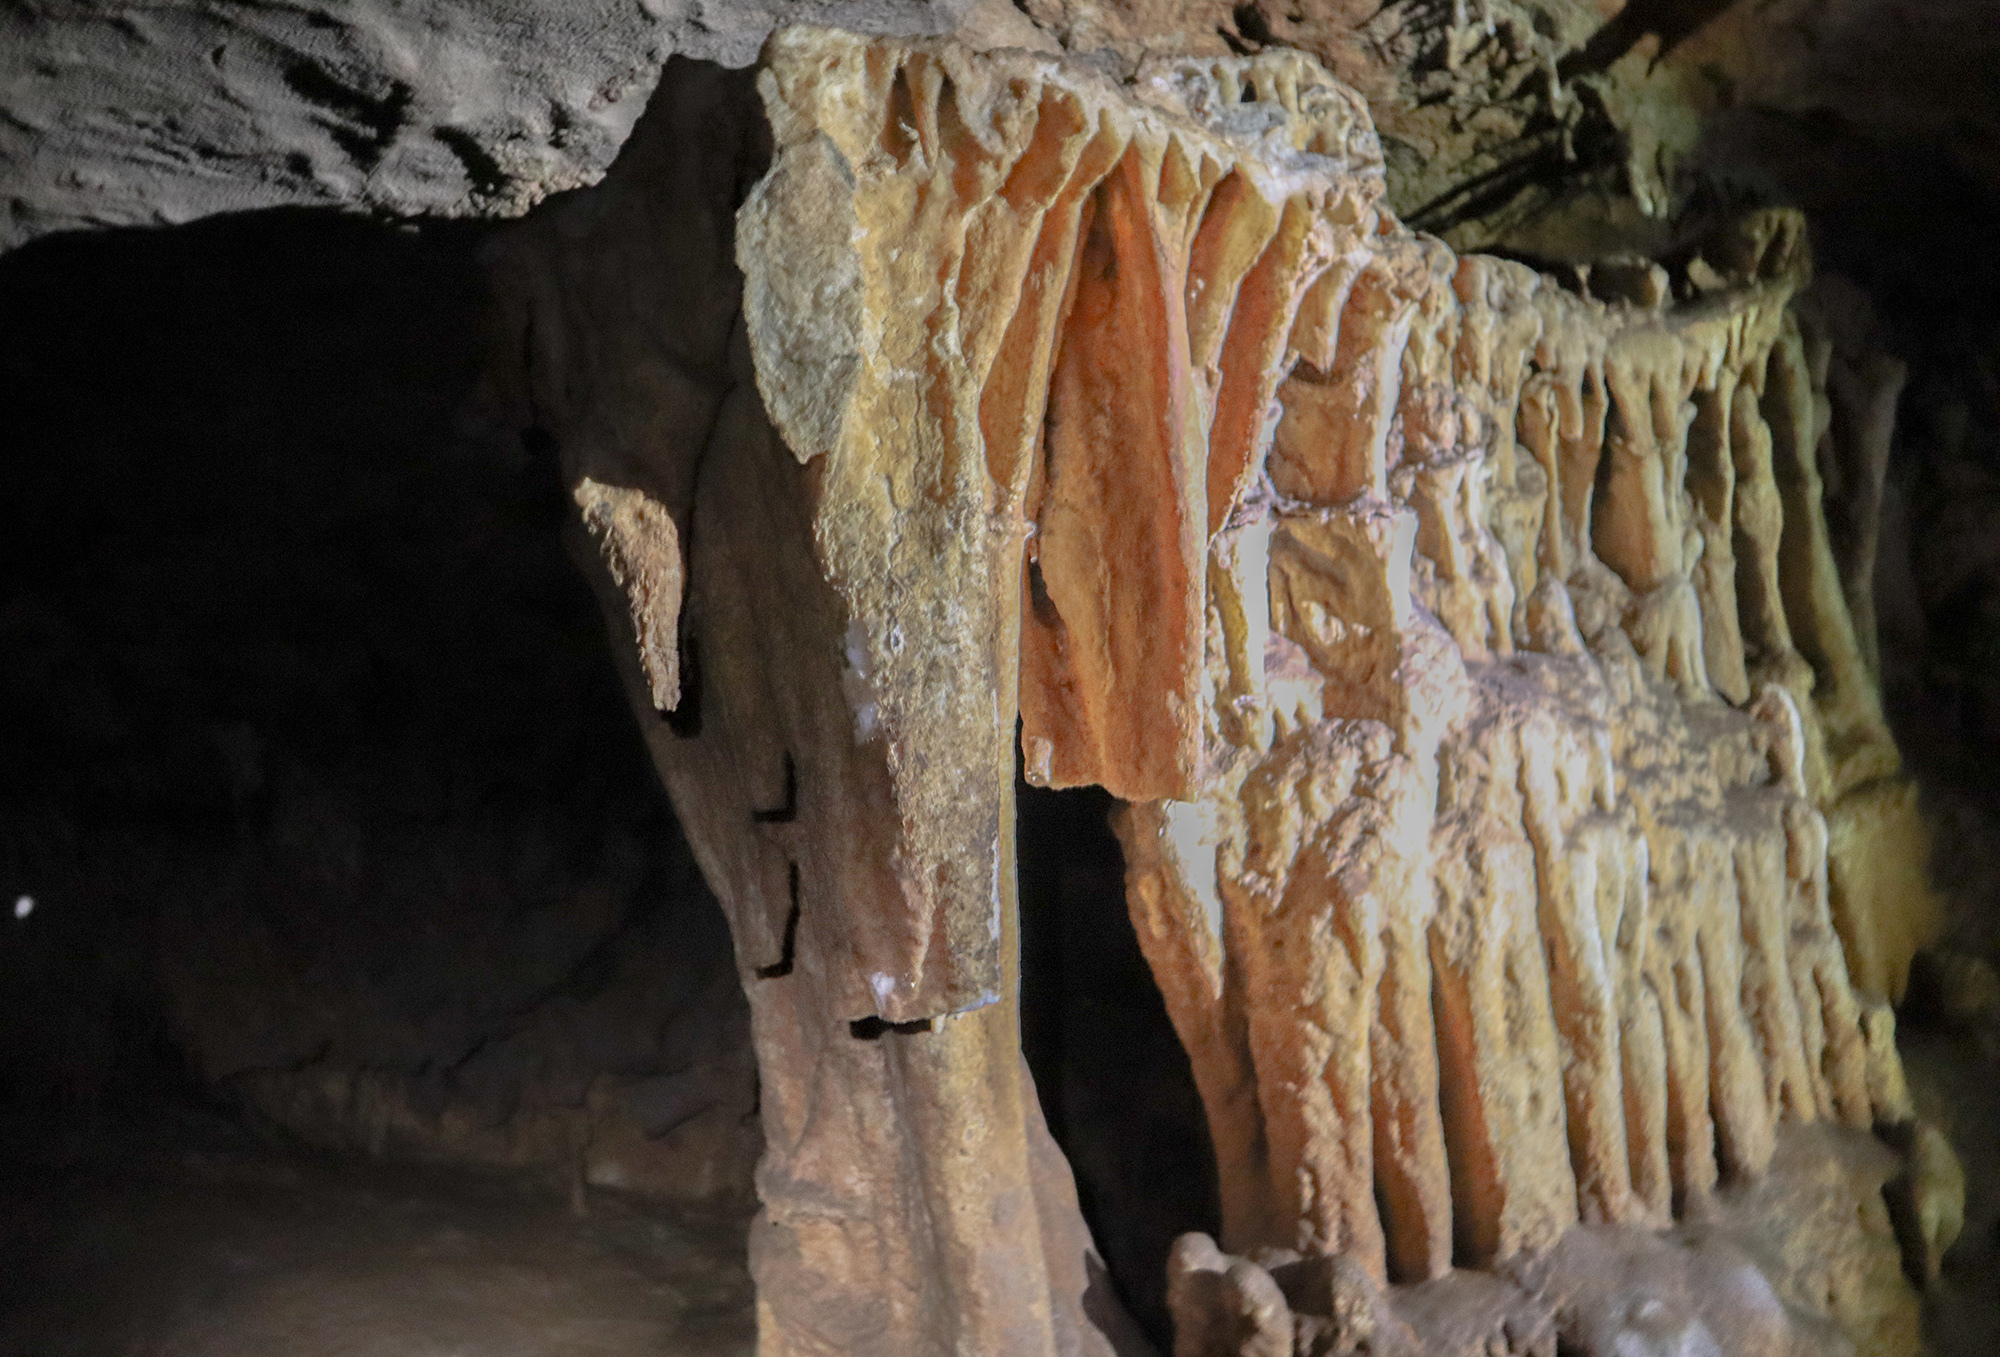 Stalactites in Swallow Cave, some off which have had pieces cut off as souvenirs  